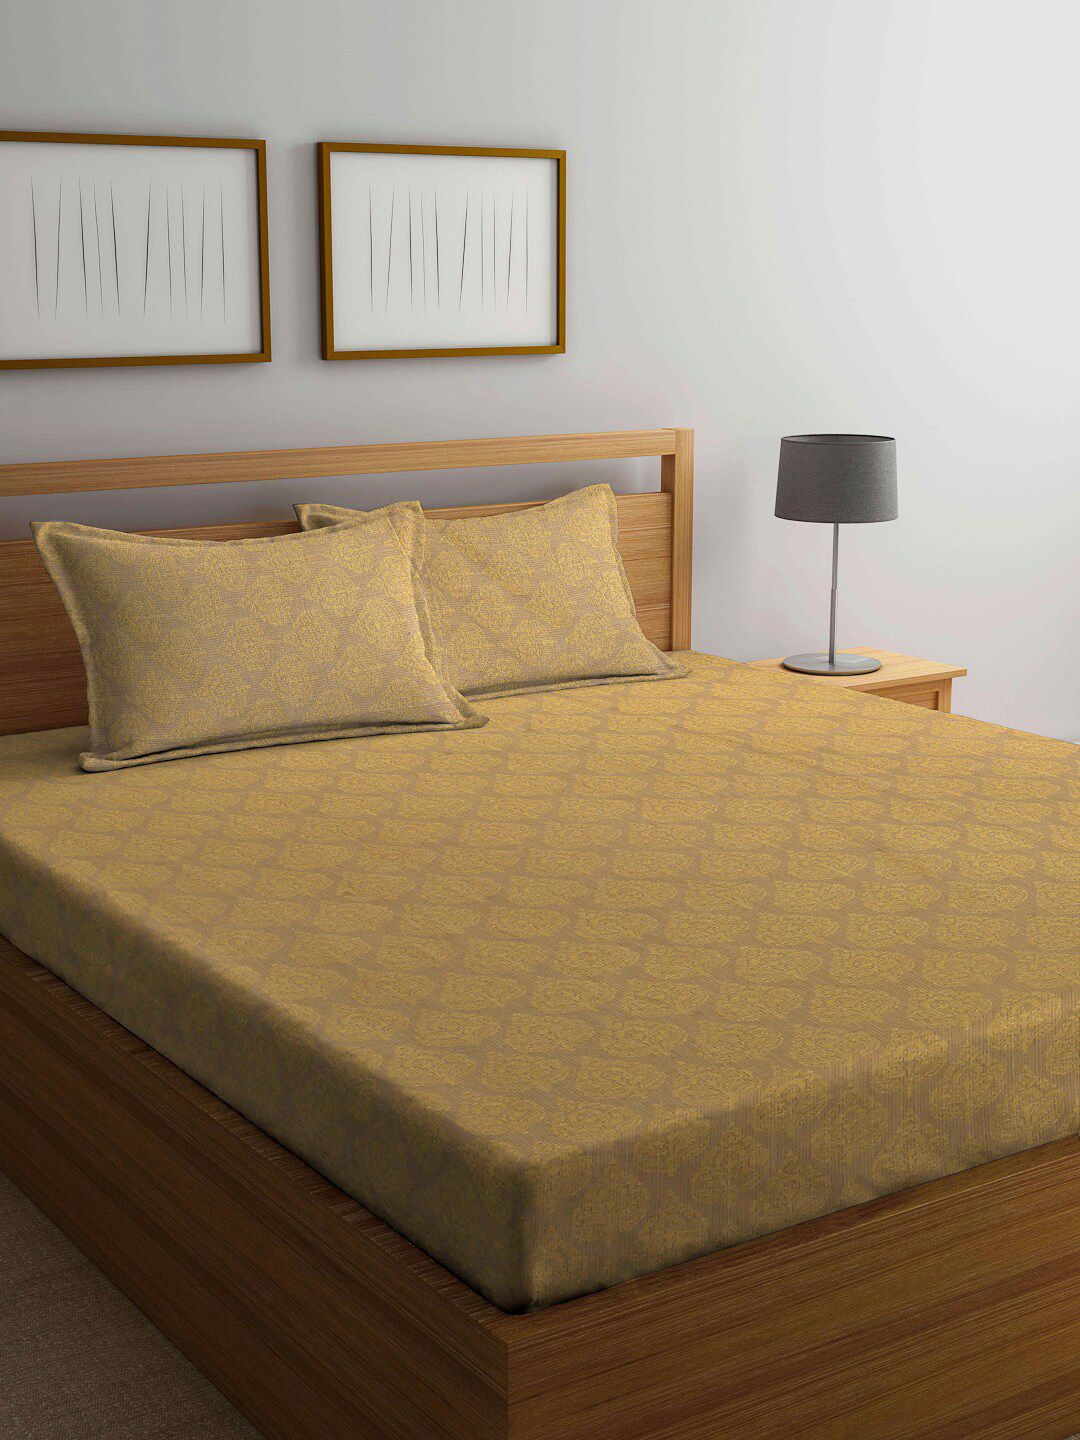 Arrabi Beige Ethnic Motifs Cotton 300 TC King Bedsheet with 2 Pillow Covers Price in India